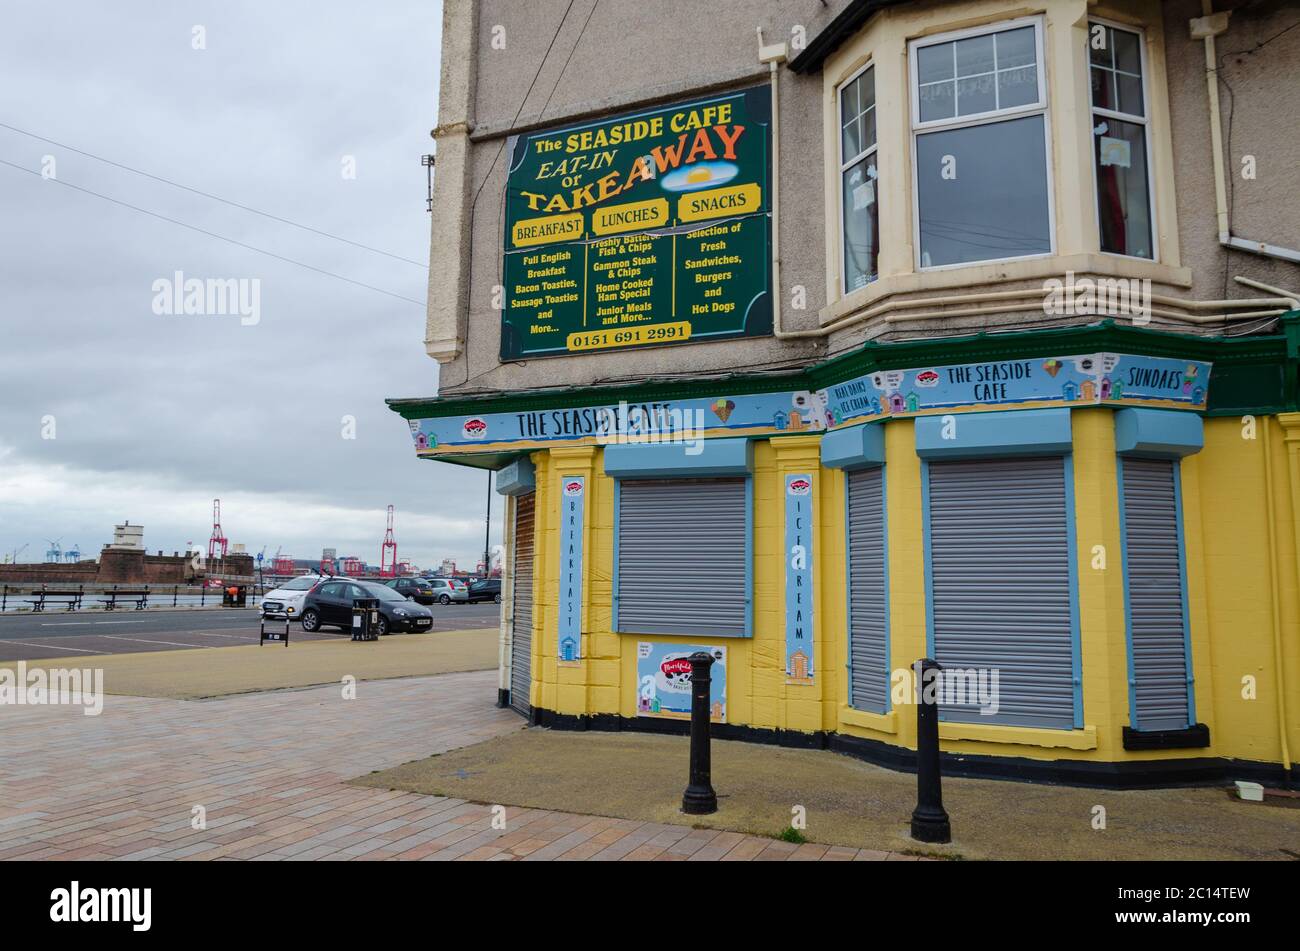 New Brighton, UK: Jun 3, 2020: A street view shows the impact of Corona virus pandemic on businesses which are required by law to close temporarily. Stock Photo